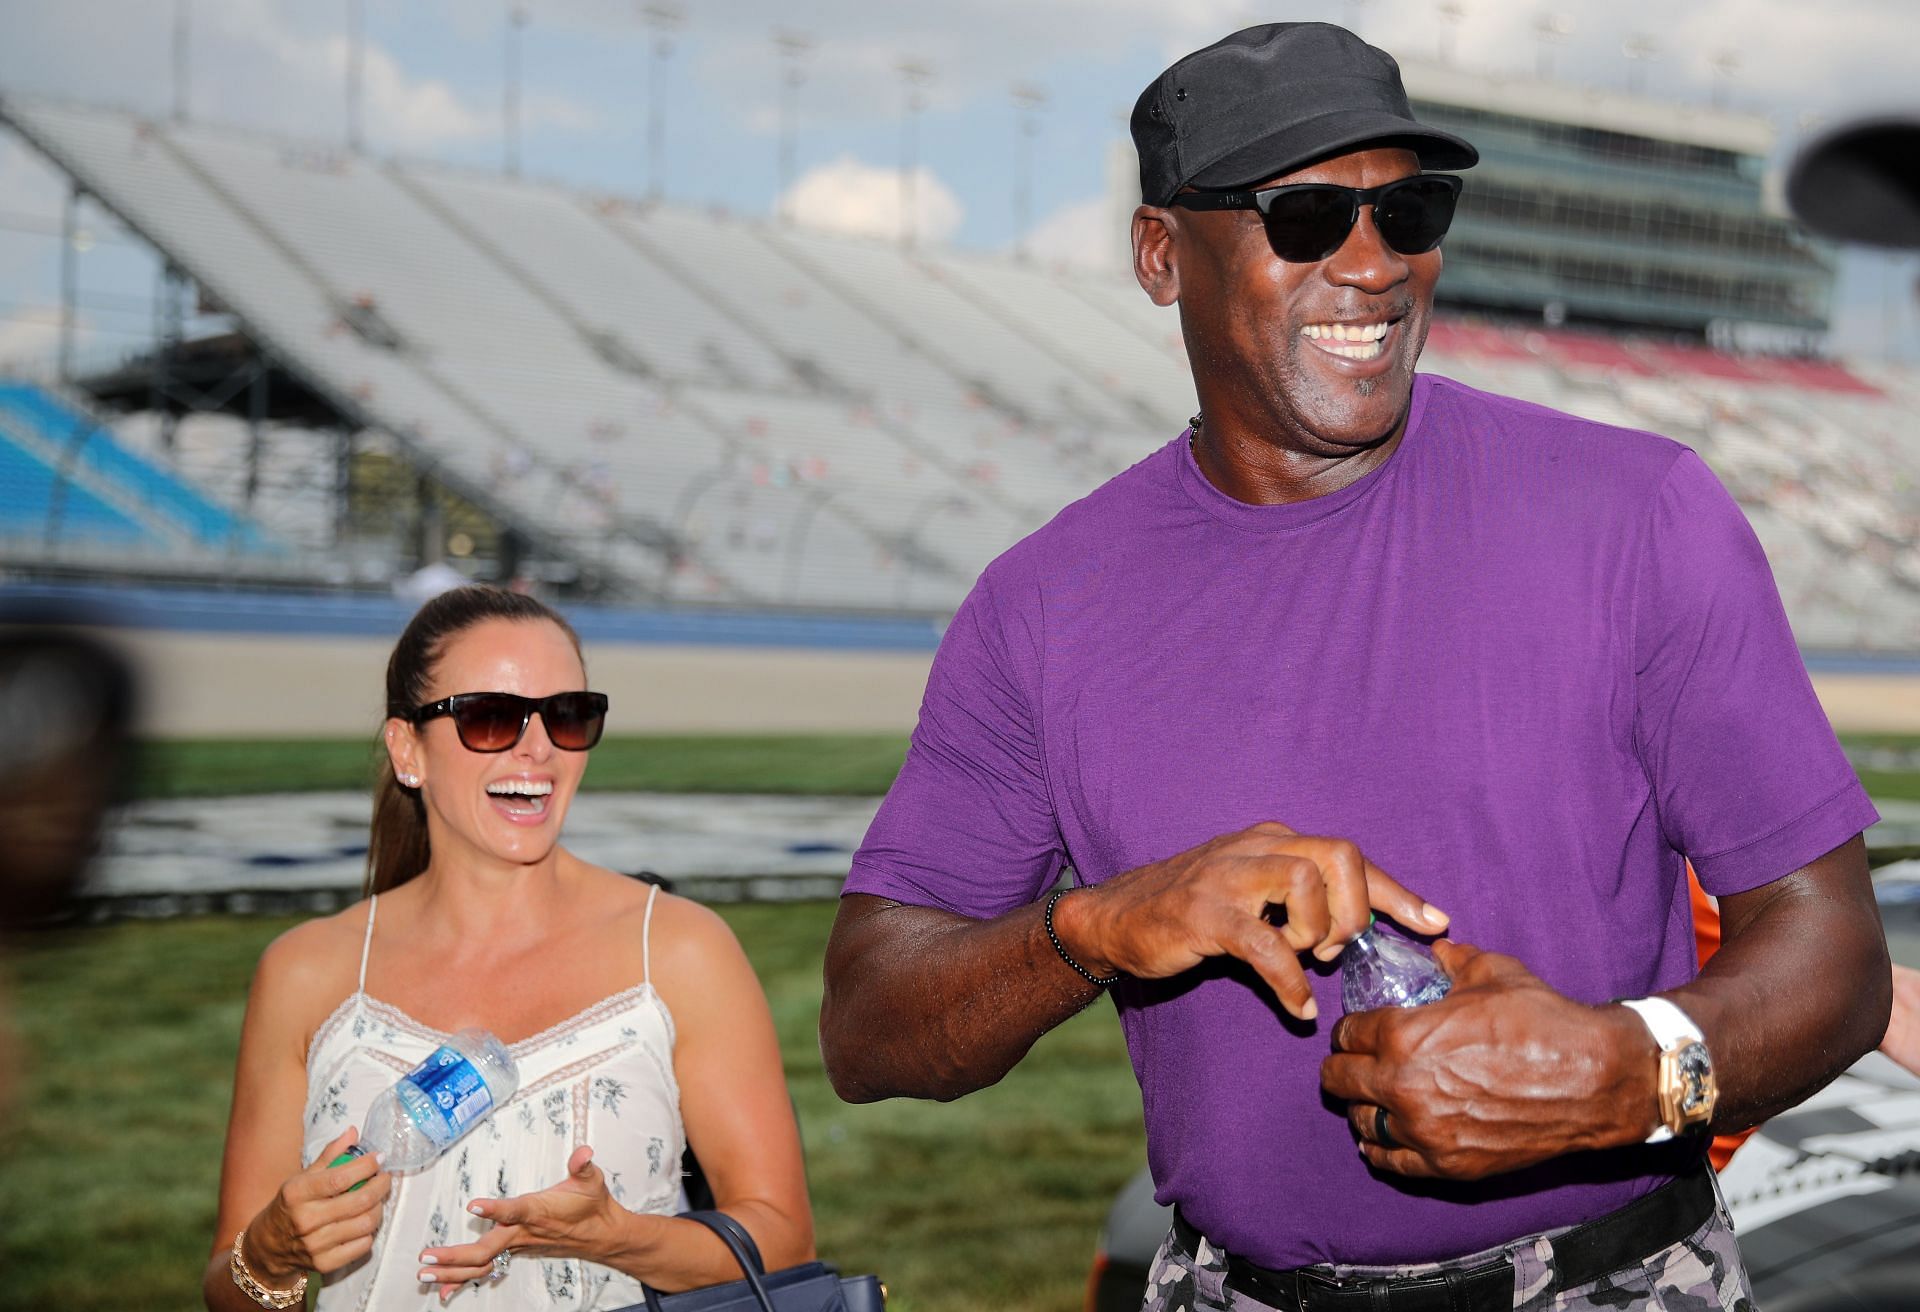 Top 5 facts to know about Michael Jordan's wife, Yvette Prieto